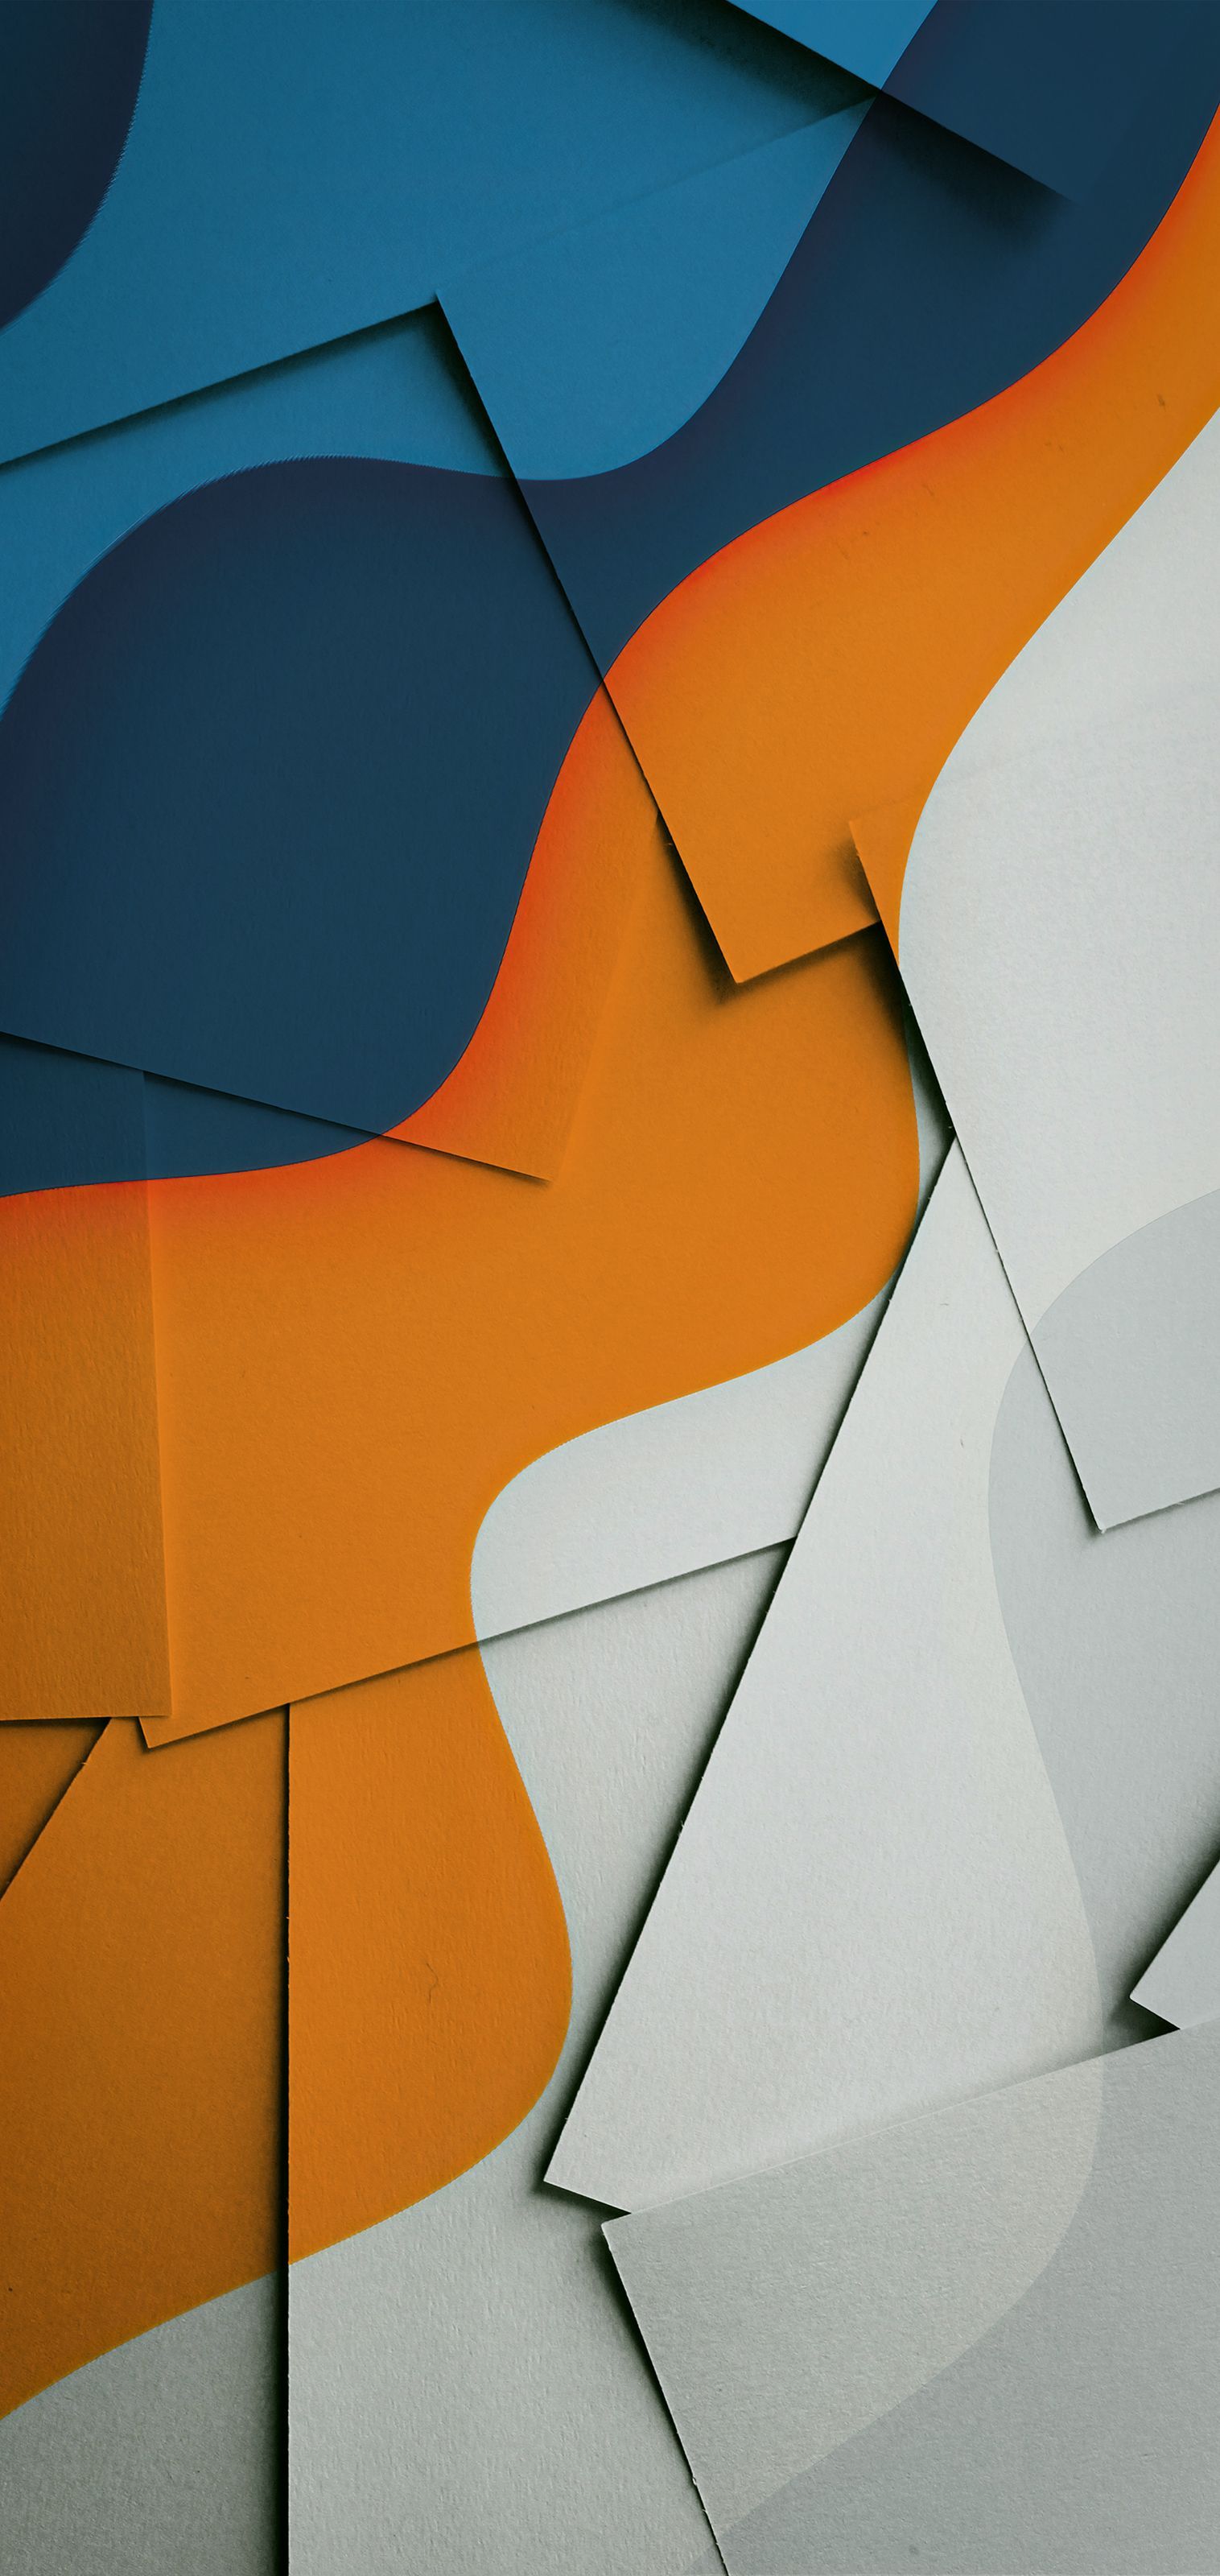 Abstract wallpaper with geometric colors and shapes for iPhone